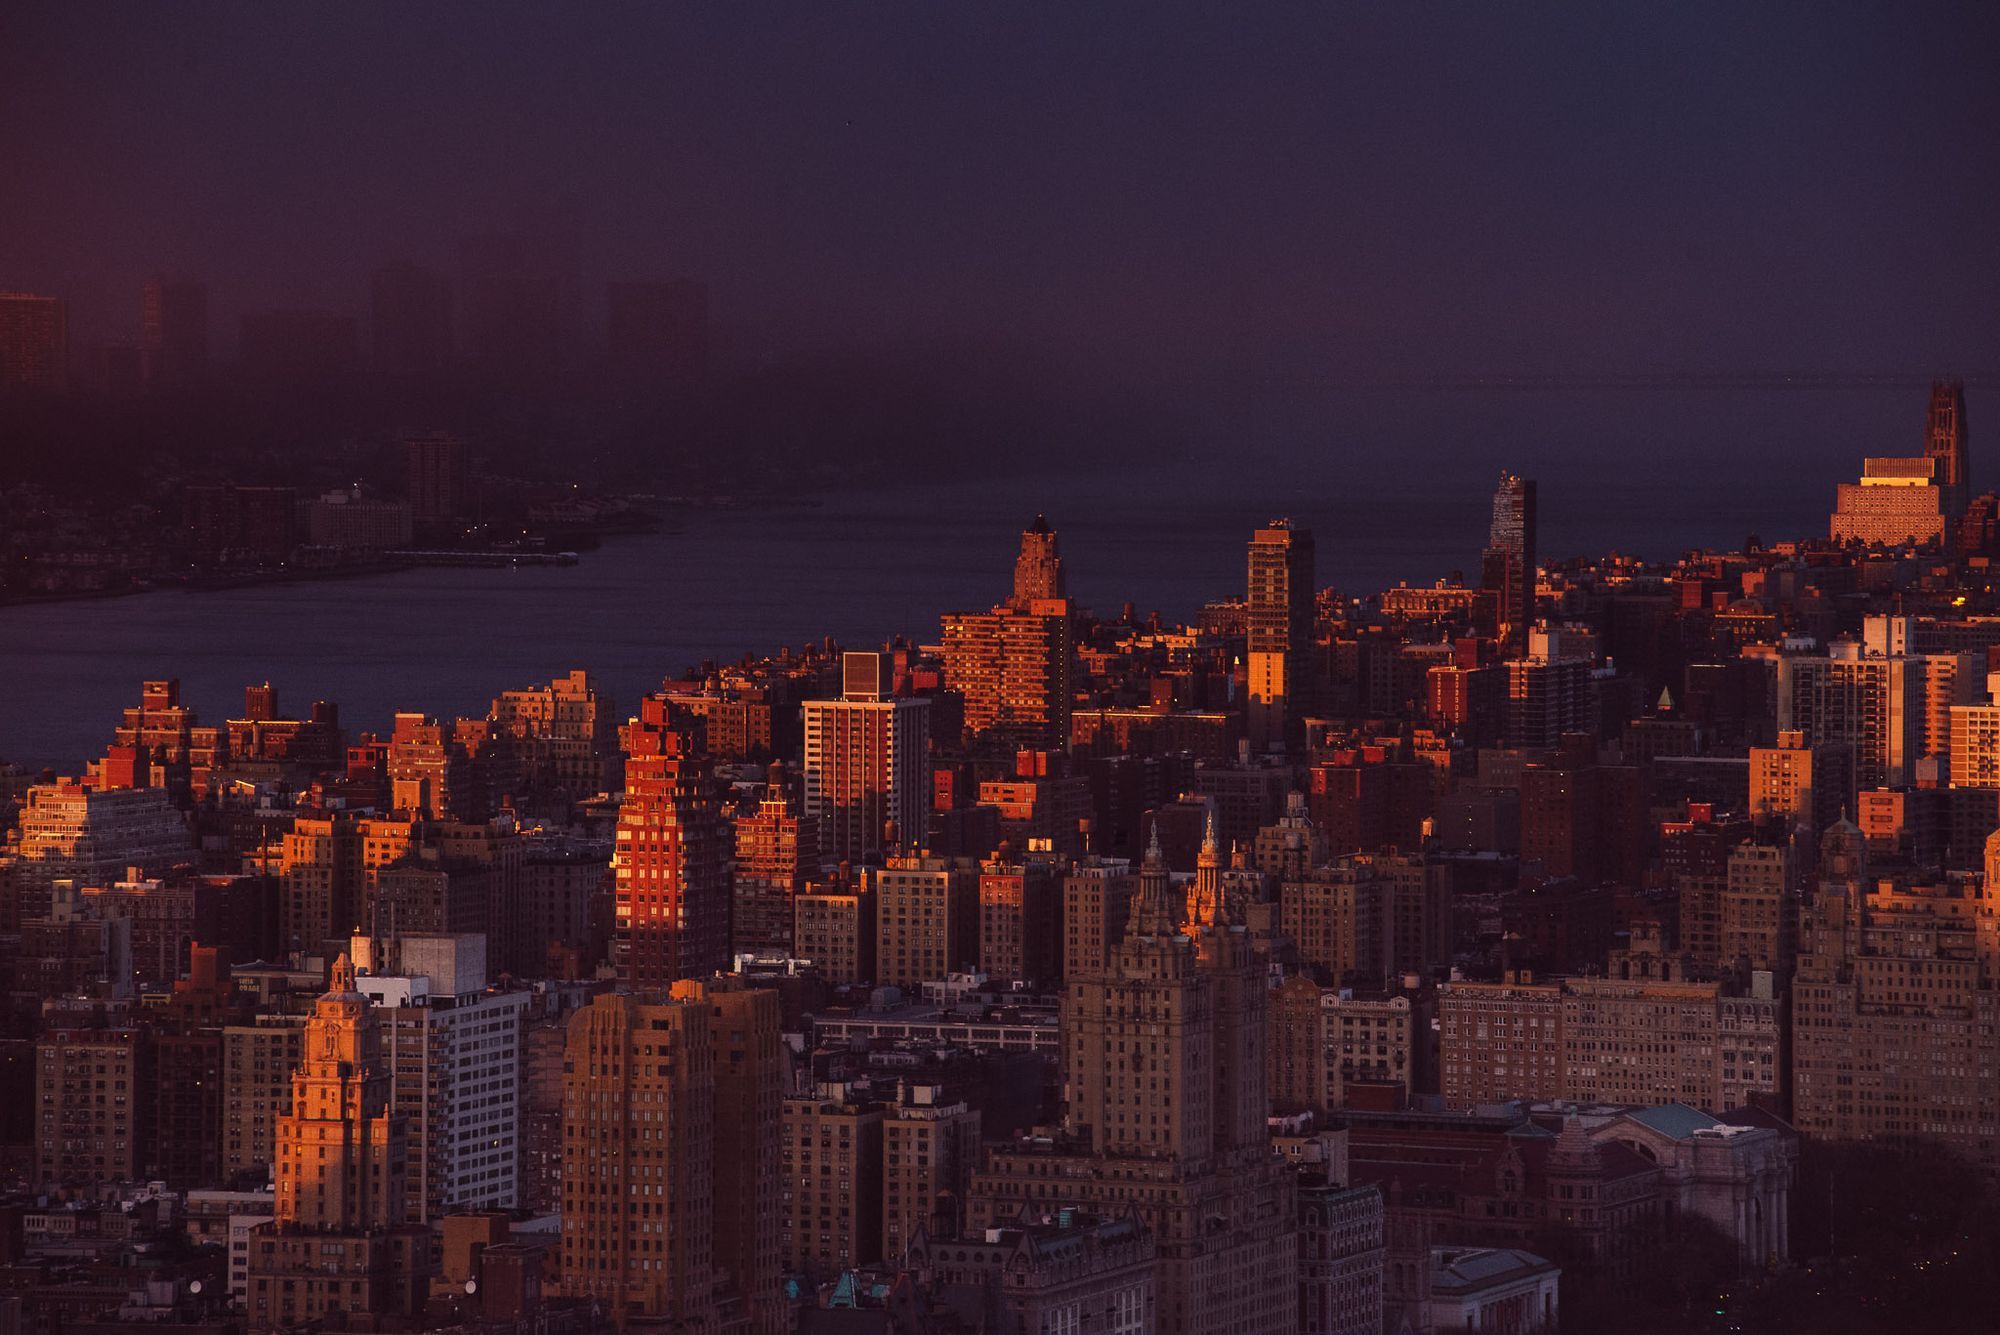 A view over the upper west side of Manhattan at sunset.